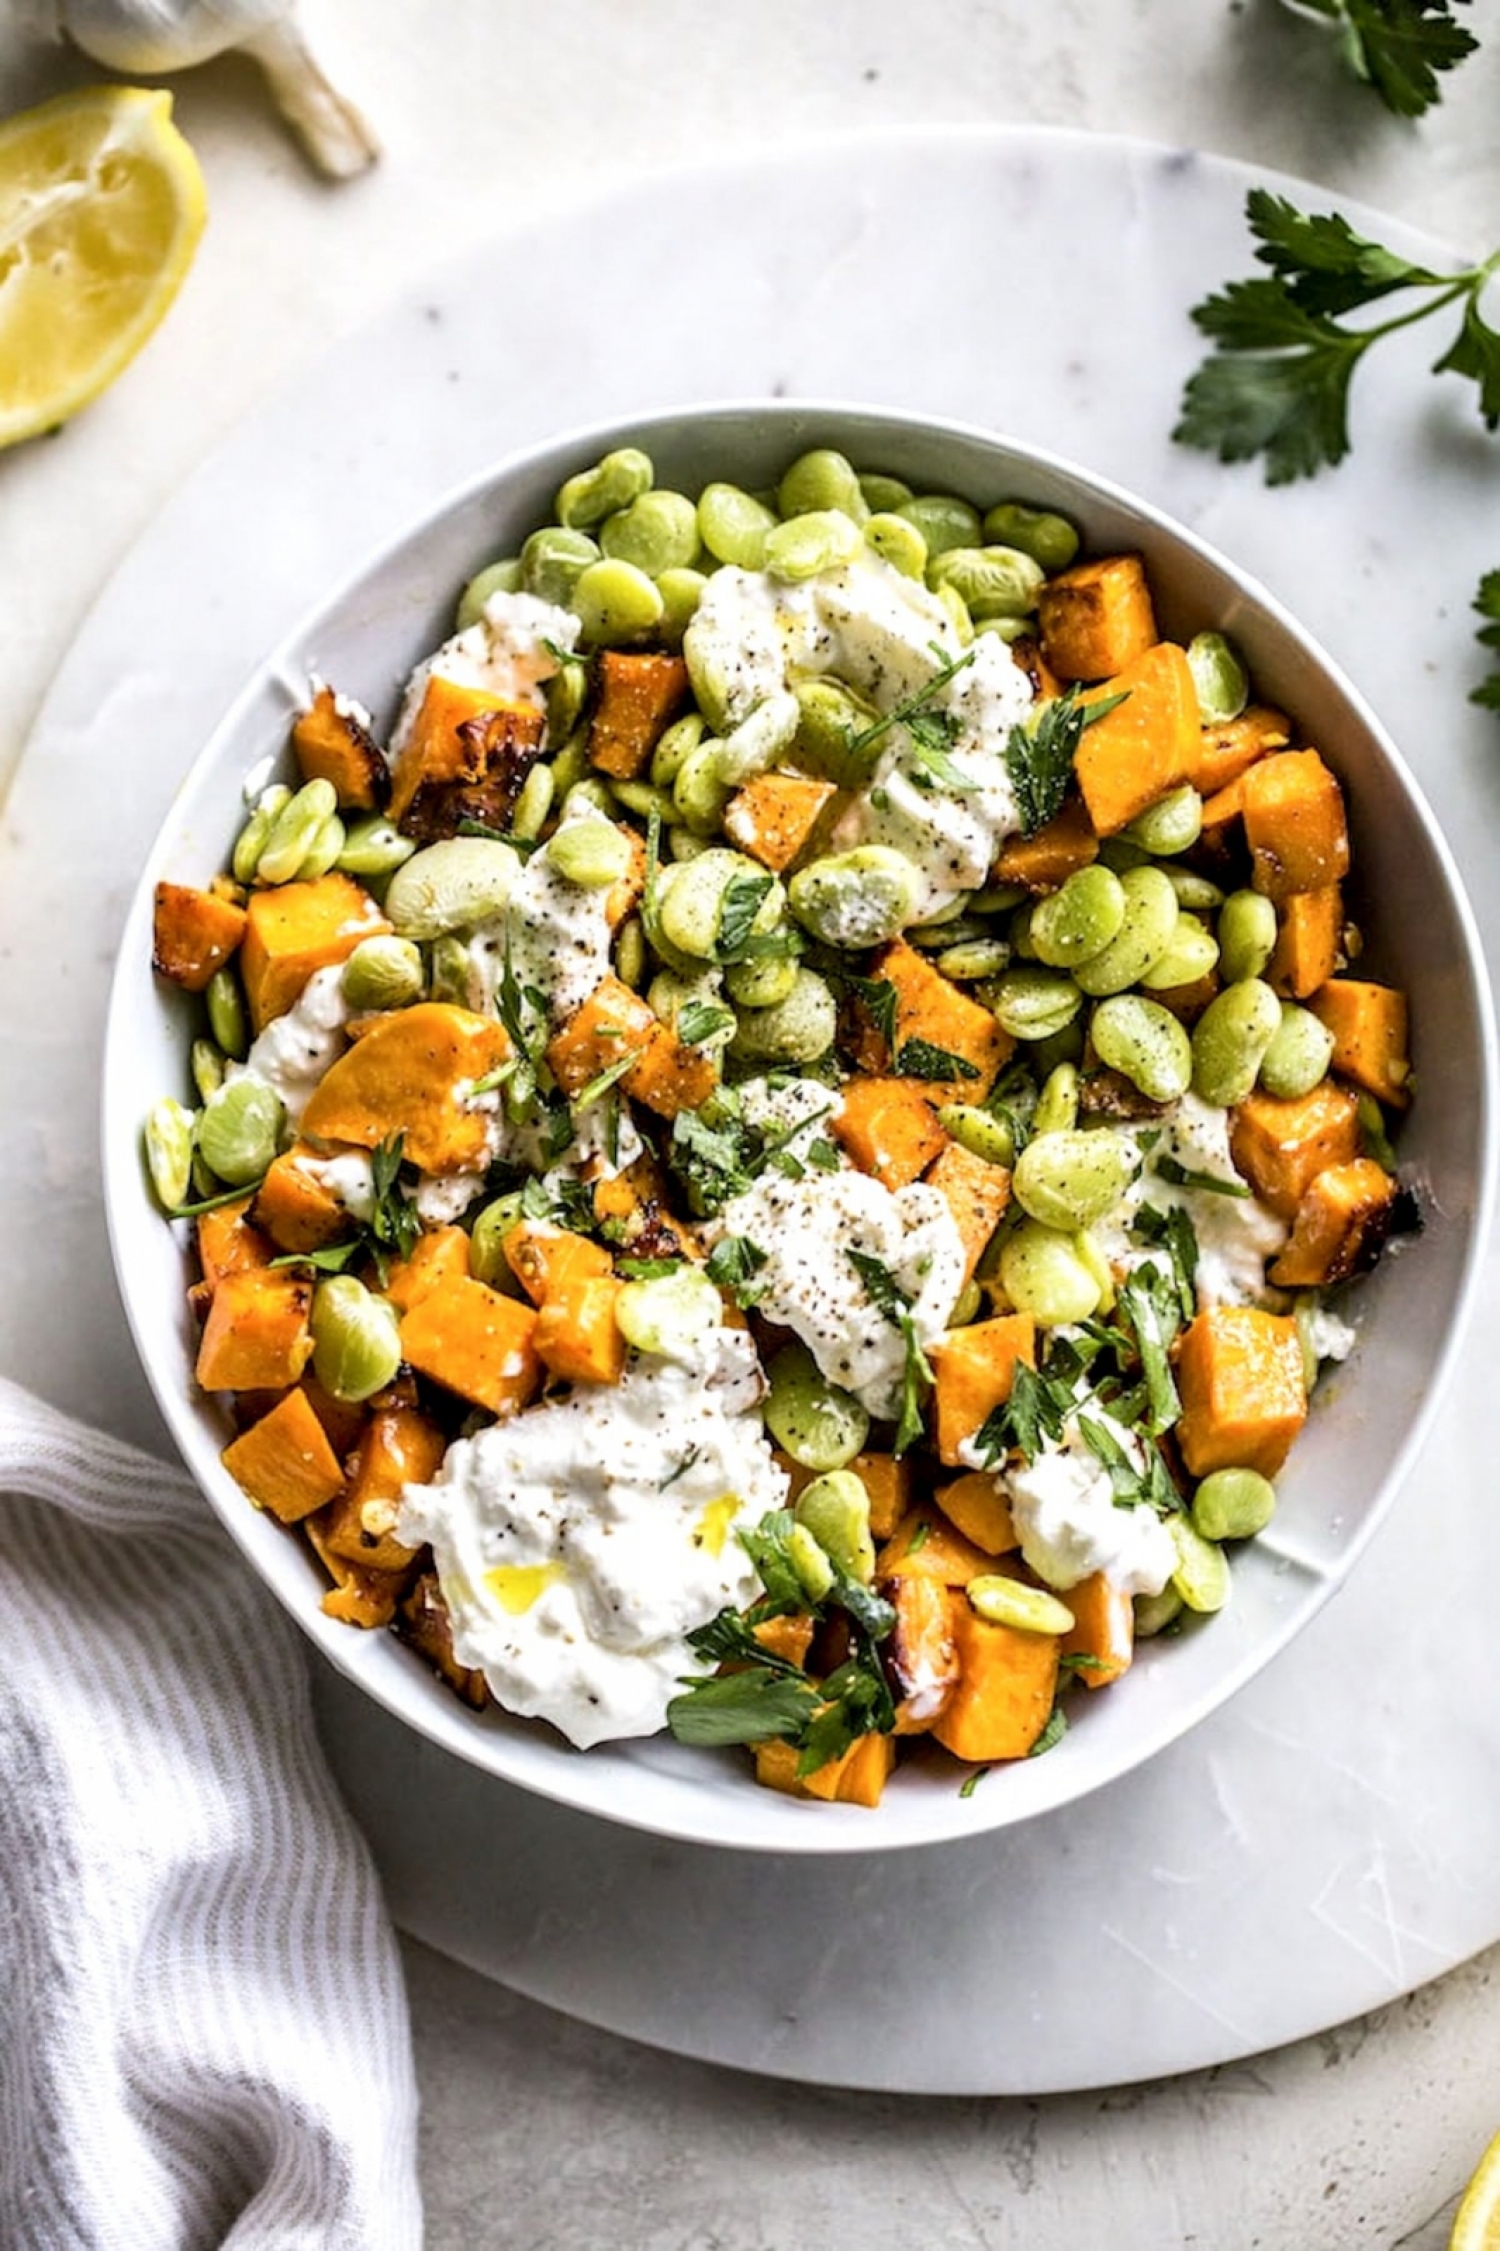 <p>This gorgeous, vibrant salad makes tasty use of frozen lima beans, by combining them in a refreshing salad with sautéed garlicky sweet potatoes and creamy burrata cheese. <a href="https://thealmondeater.com/garlic-lima-bean-salad/" rel="noopener">Get the recipe here.</a></p>